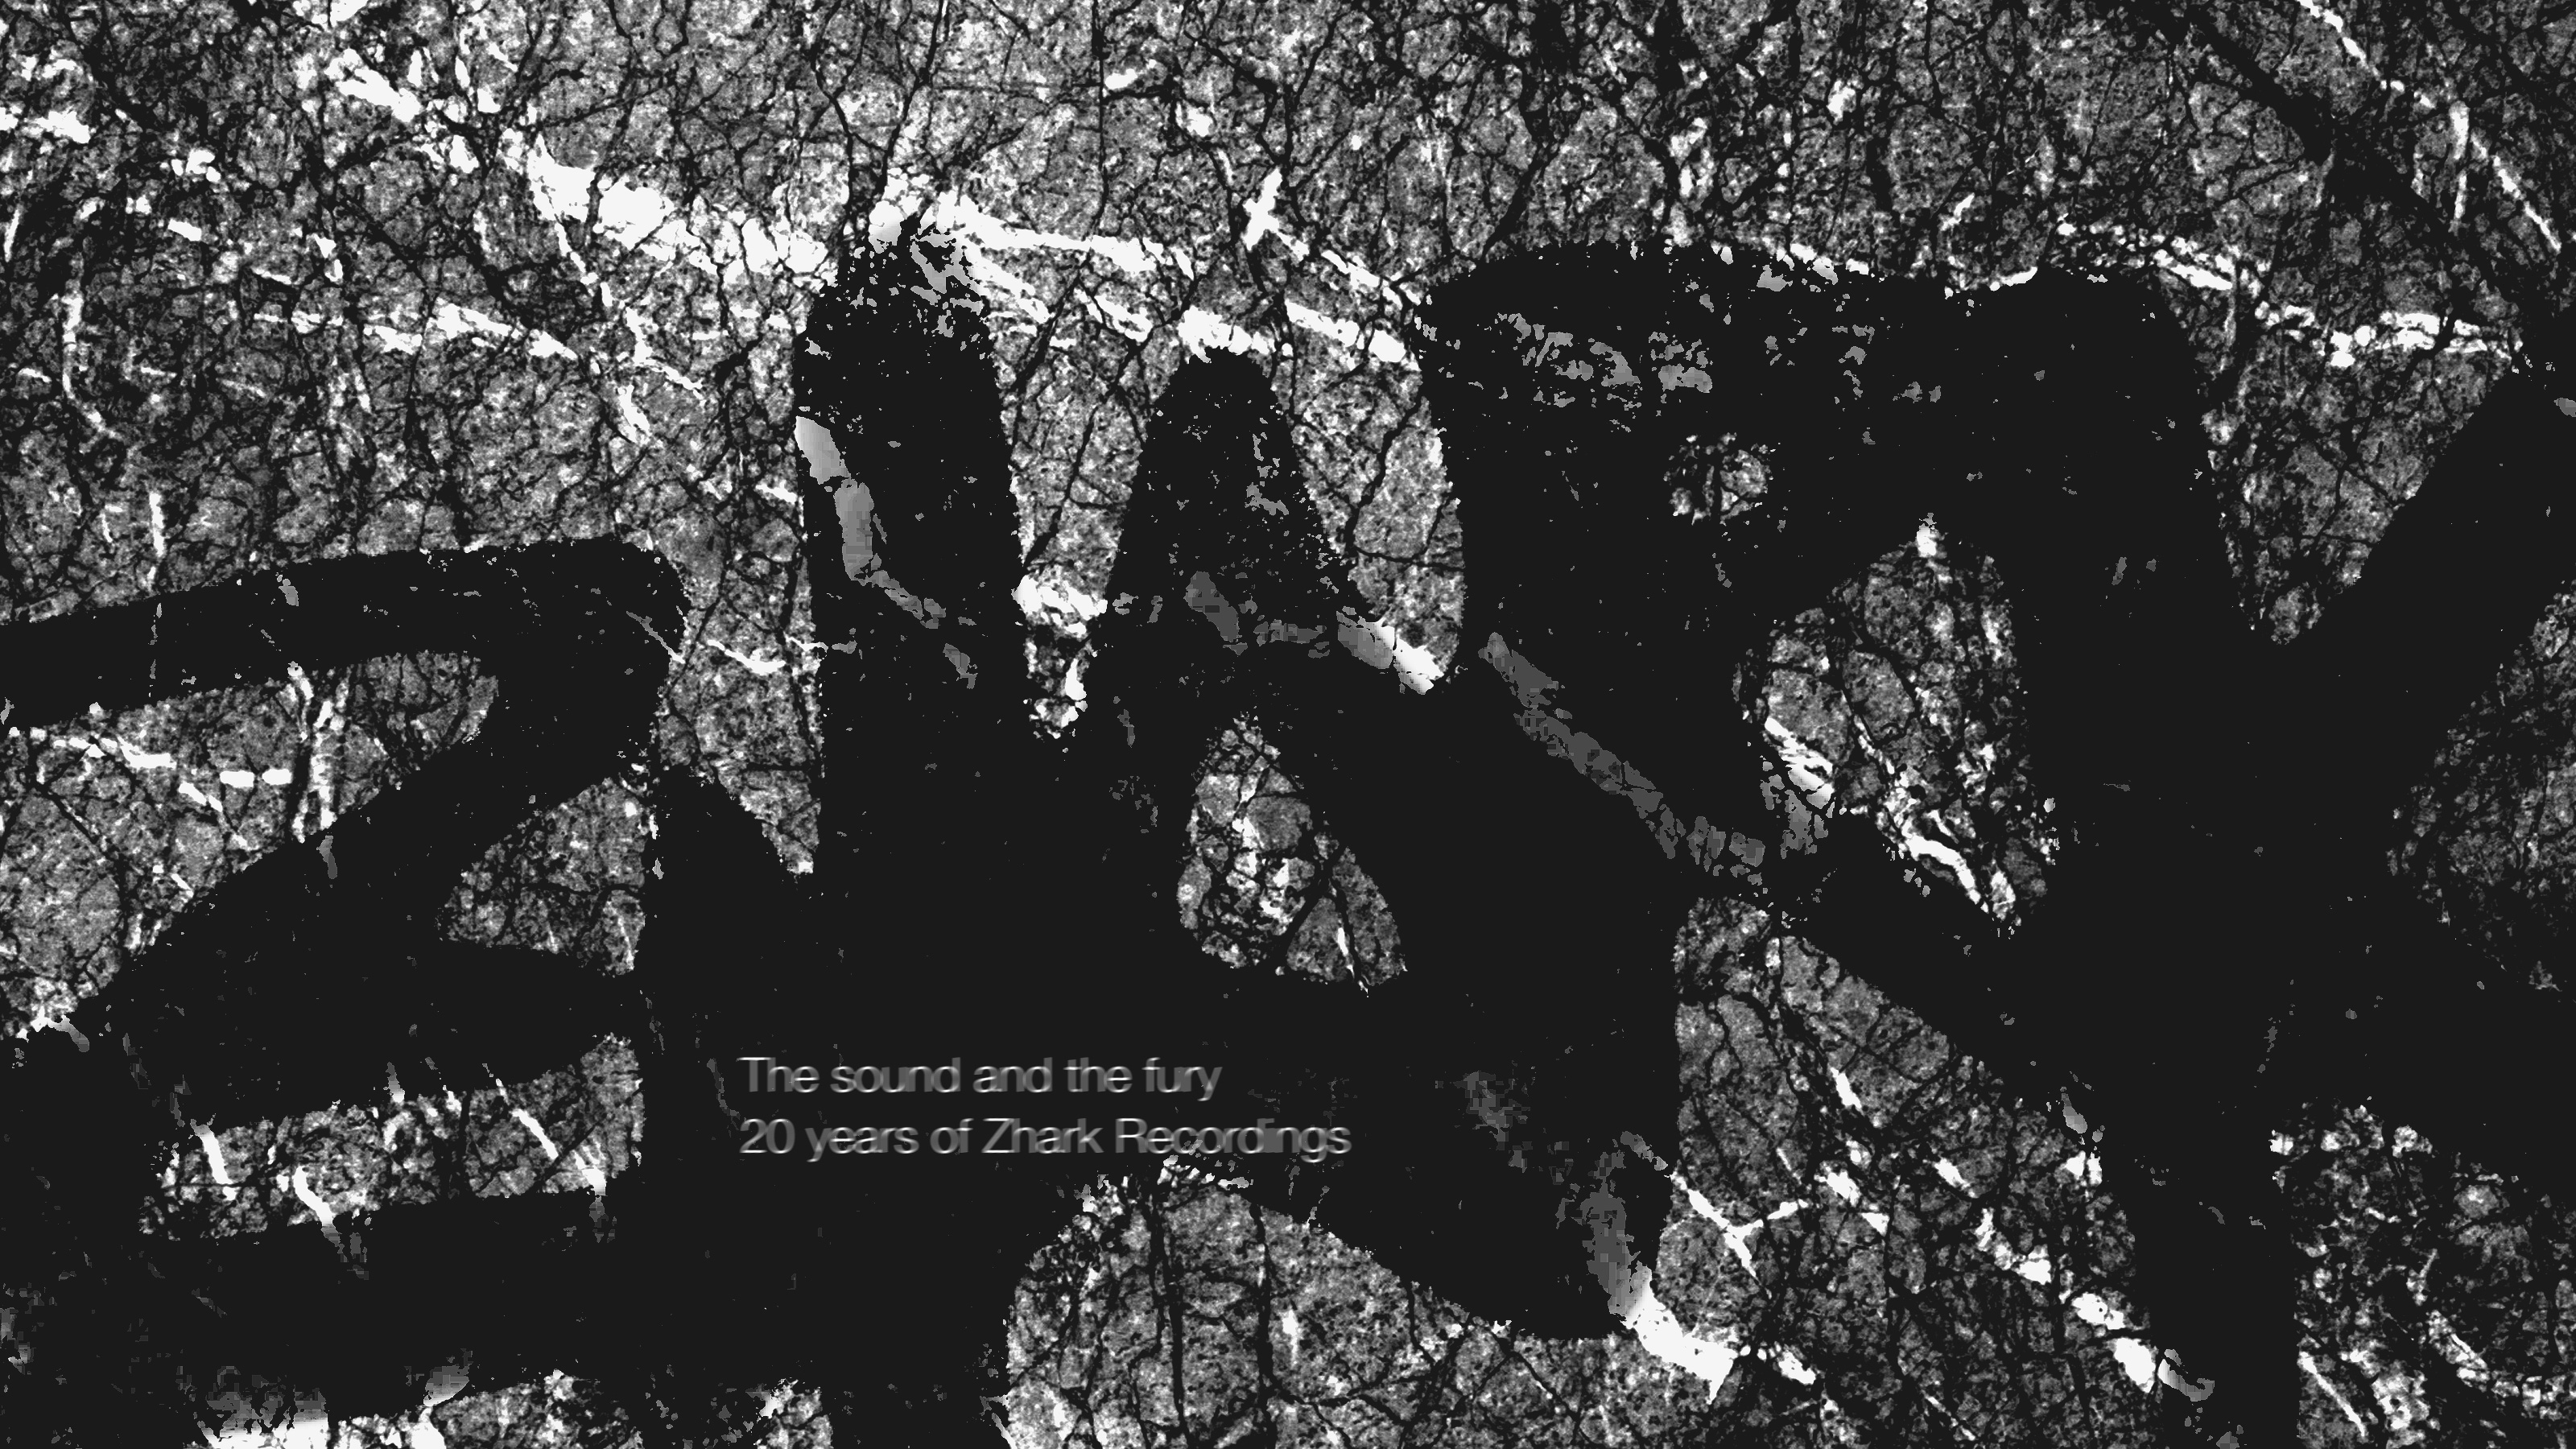 The sound and the fury: 20 years of Zhark Recordings